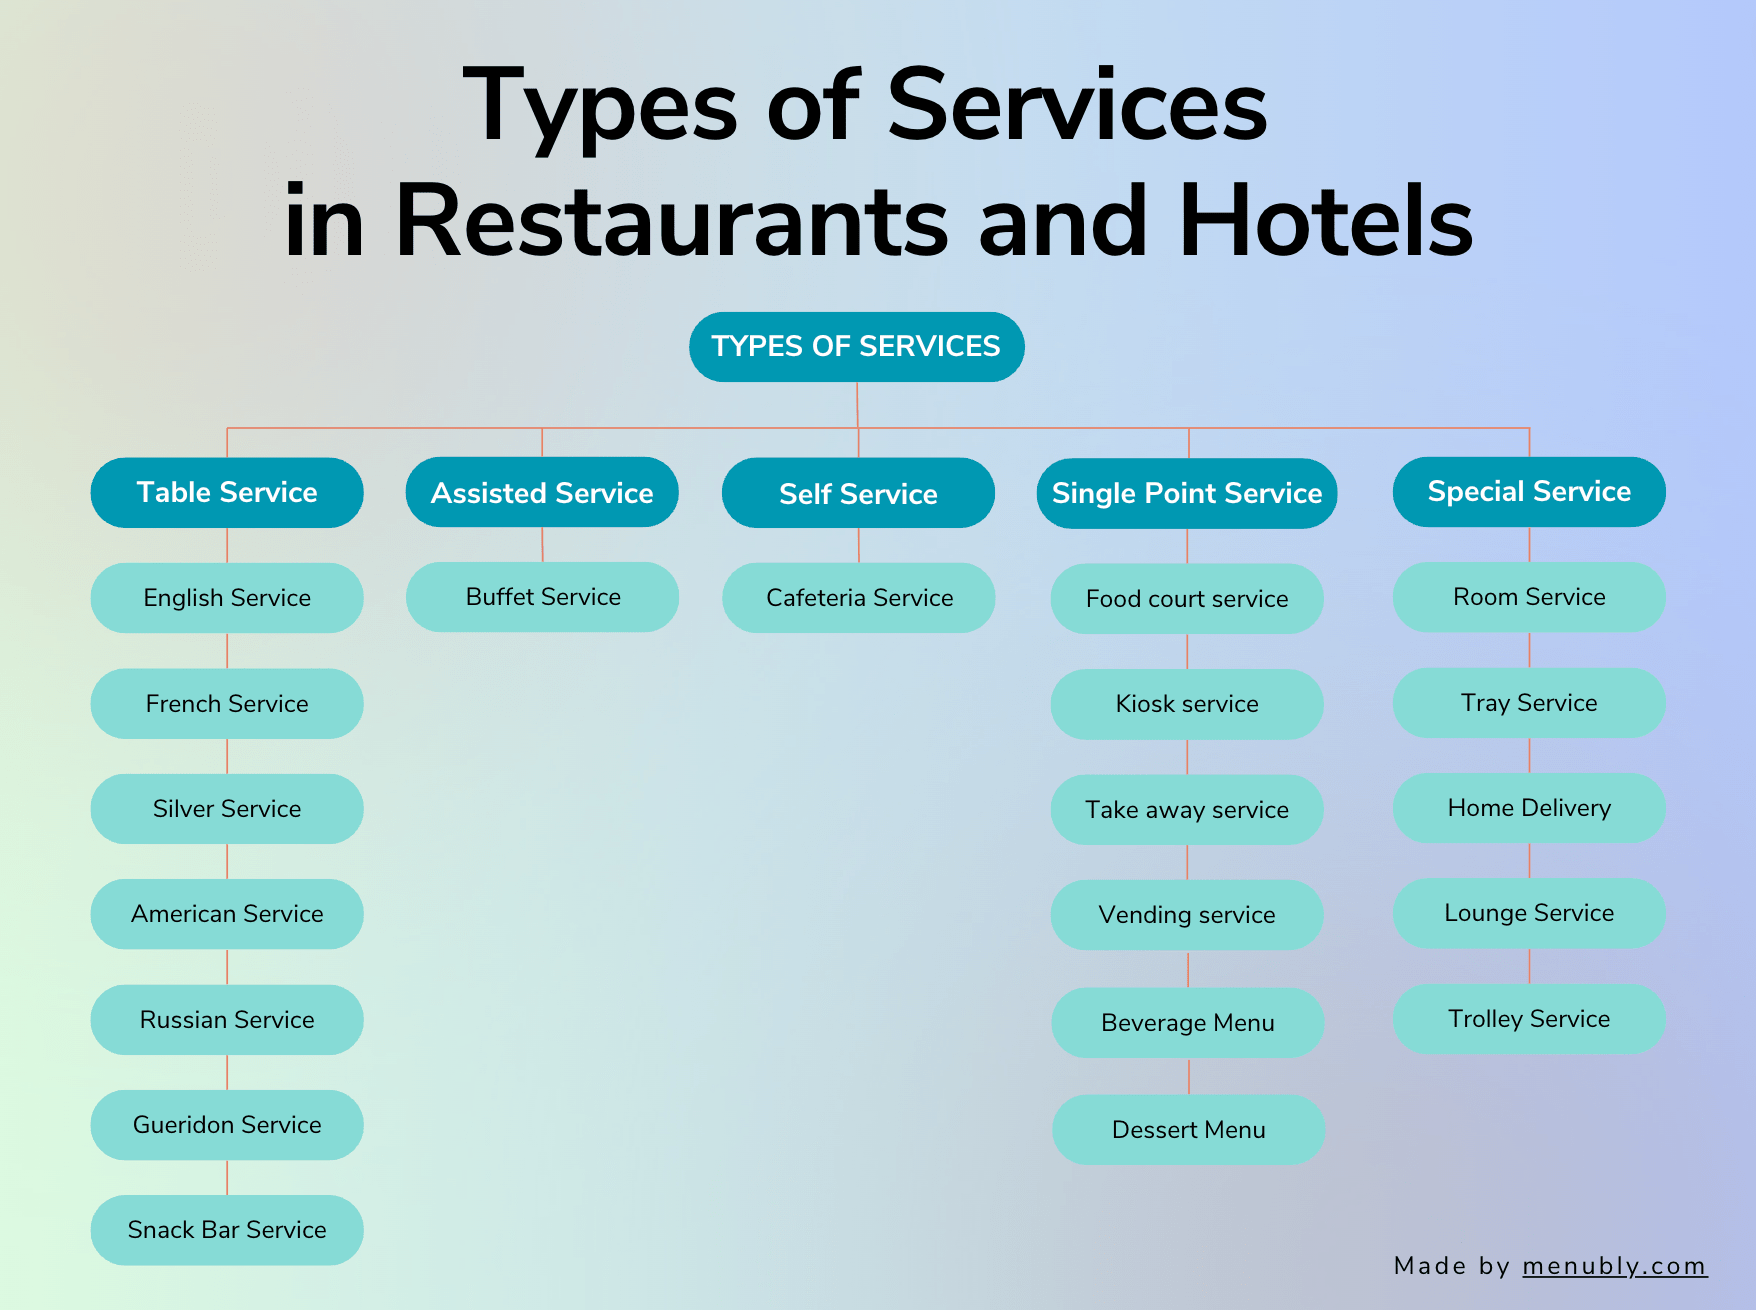 Hotel & Restaurant Services - FOOD AND BEVERAGE SERVICES